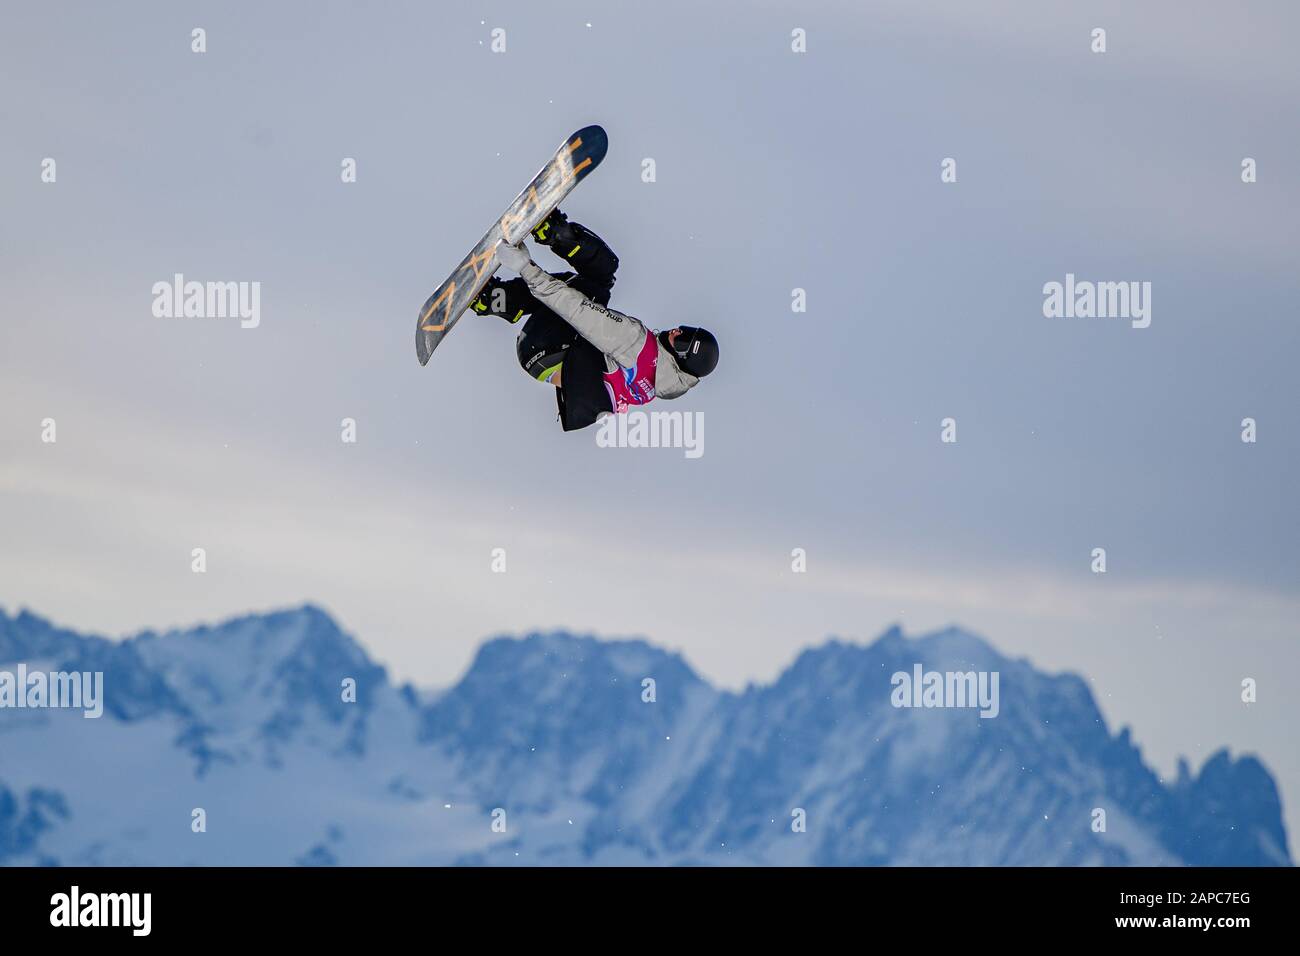 LAUSANNE, SWITZERLAND. 22th, Jan 2020. STROHMEYER Till (GER) competes in the Snowboard: Men's Big Air competitions during the Lausanne 2020 Youth Olympic Games at Leysin Park & Pipe on Wednesday, 22 January 2020. LAUSANNE, SWITZERLAND. Credit: Taka G Wu/Alamy Live News Stock Photo